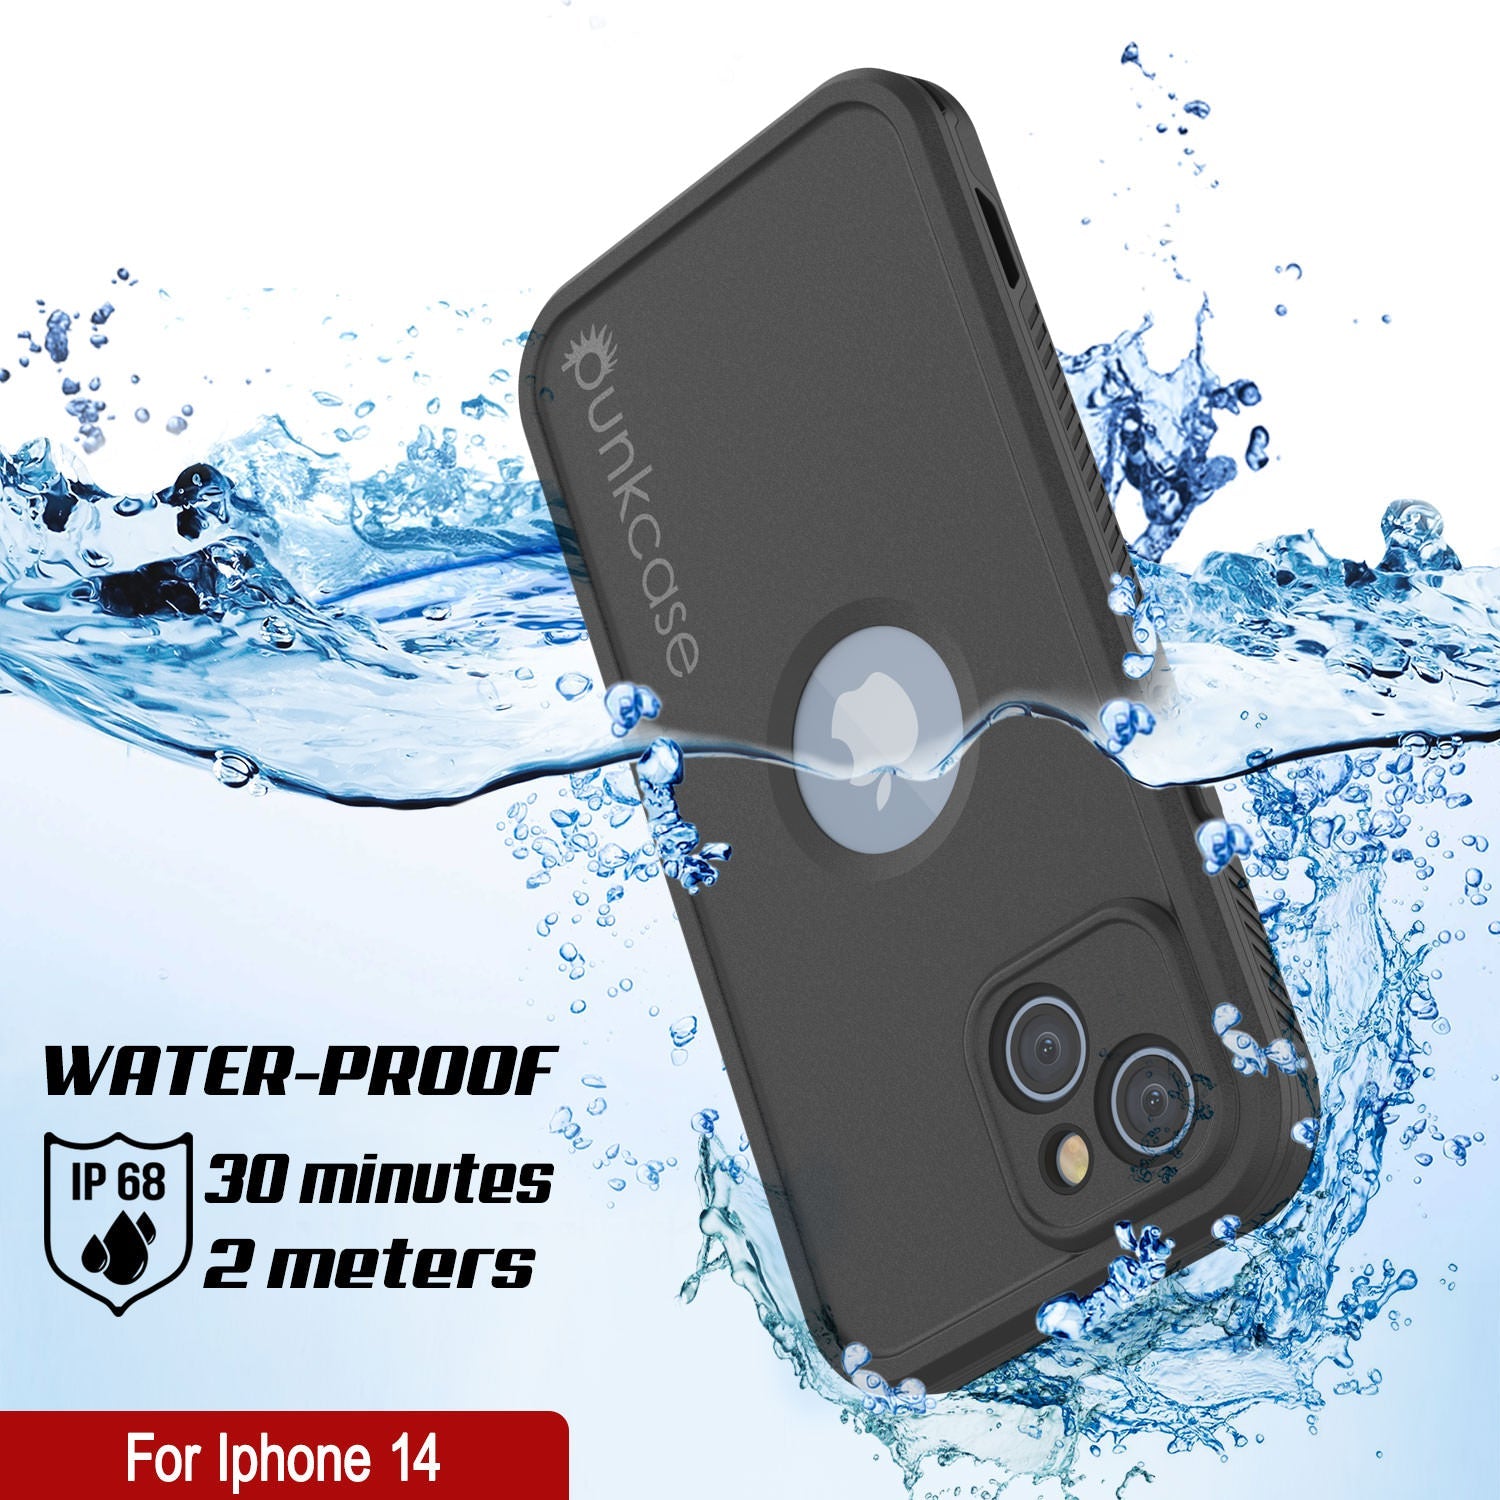 iPhone XS Max Waterproof Case, Punkcase [Extreme Series] Armor Cover W/  Built In Screen Protector [Black]